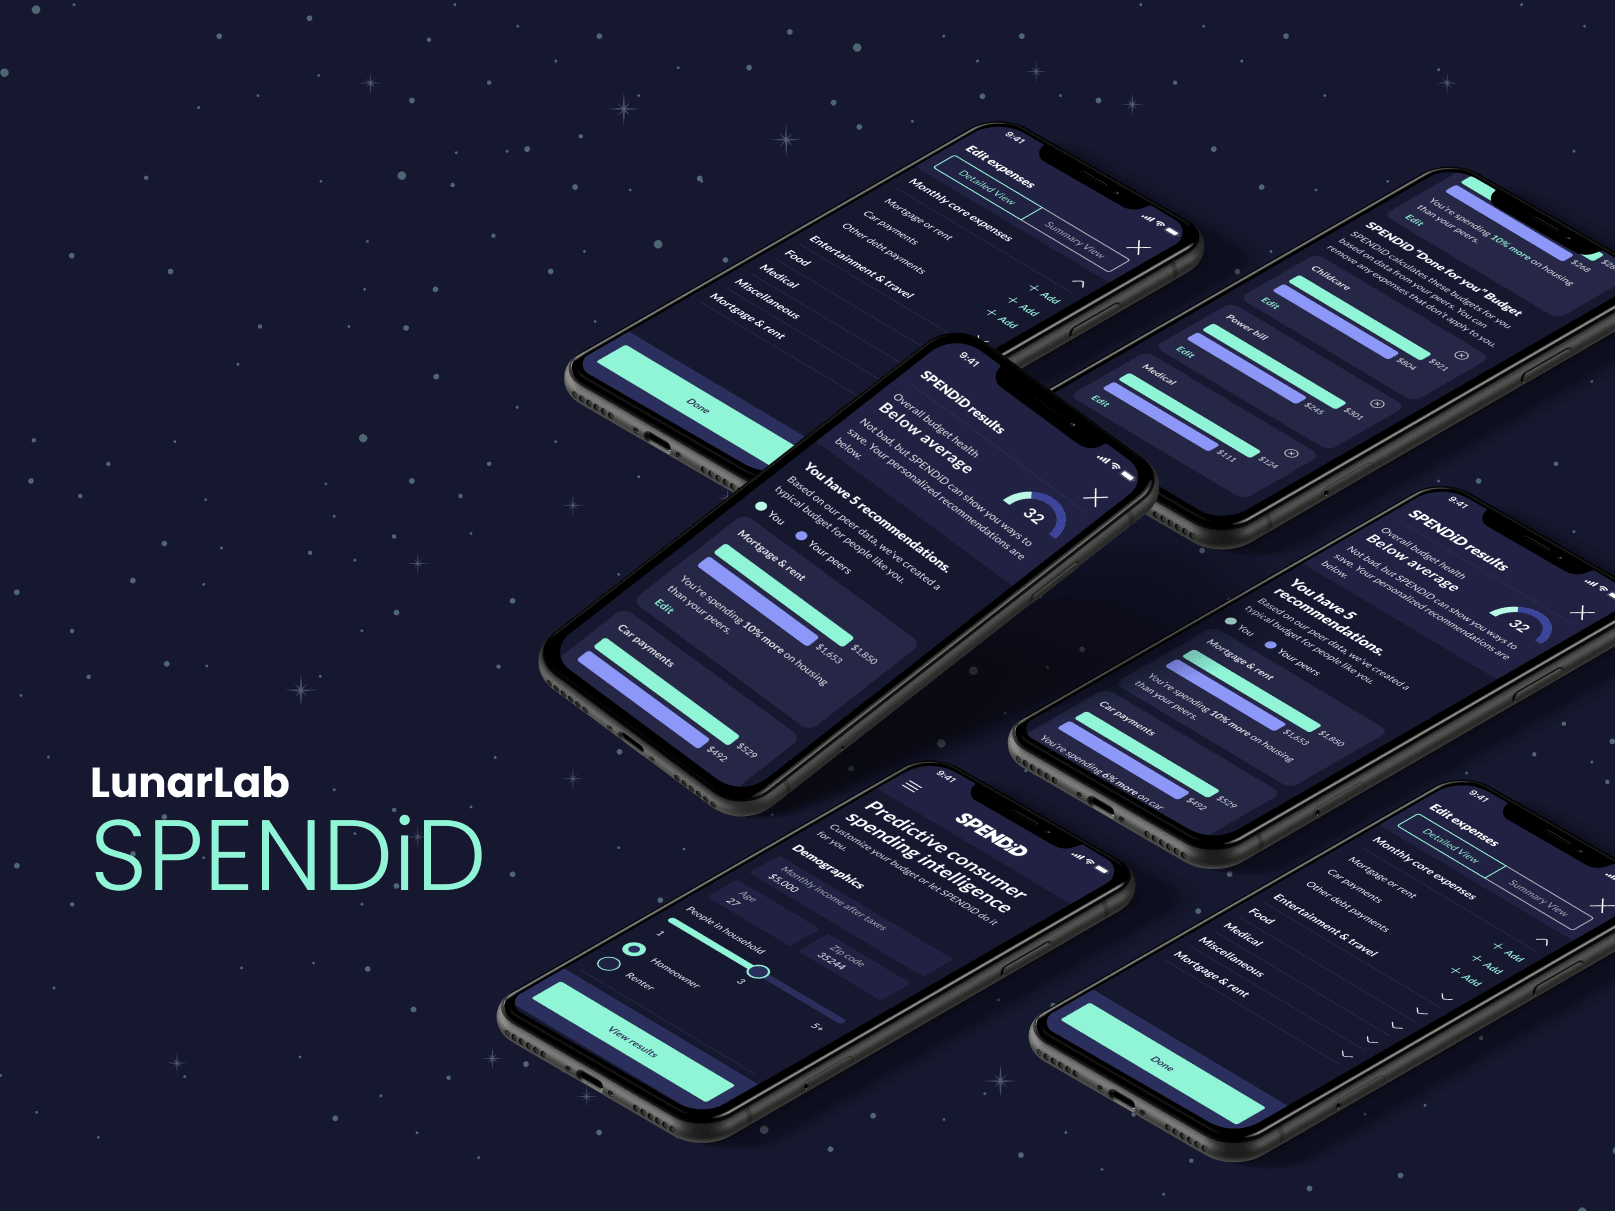 Mockups of mobile devices showing Spendid screens